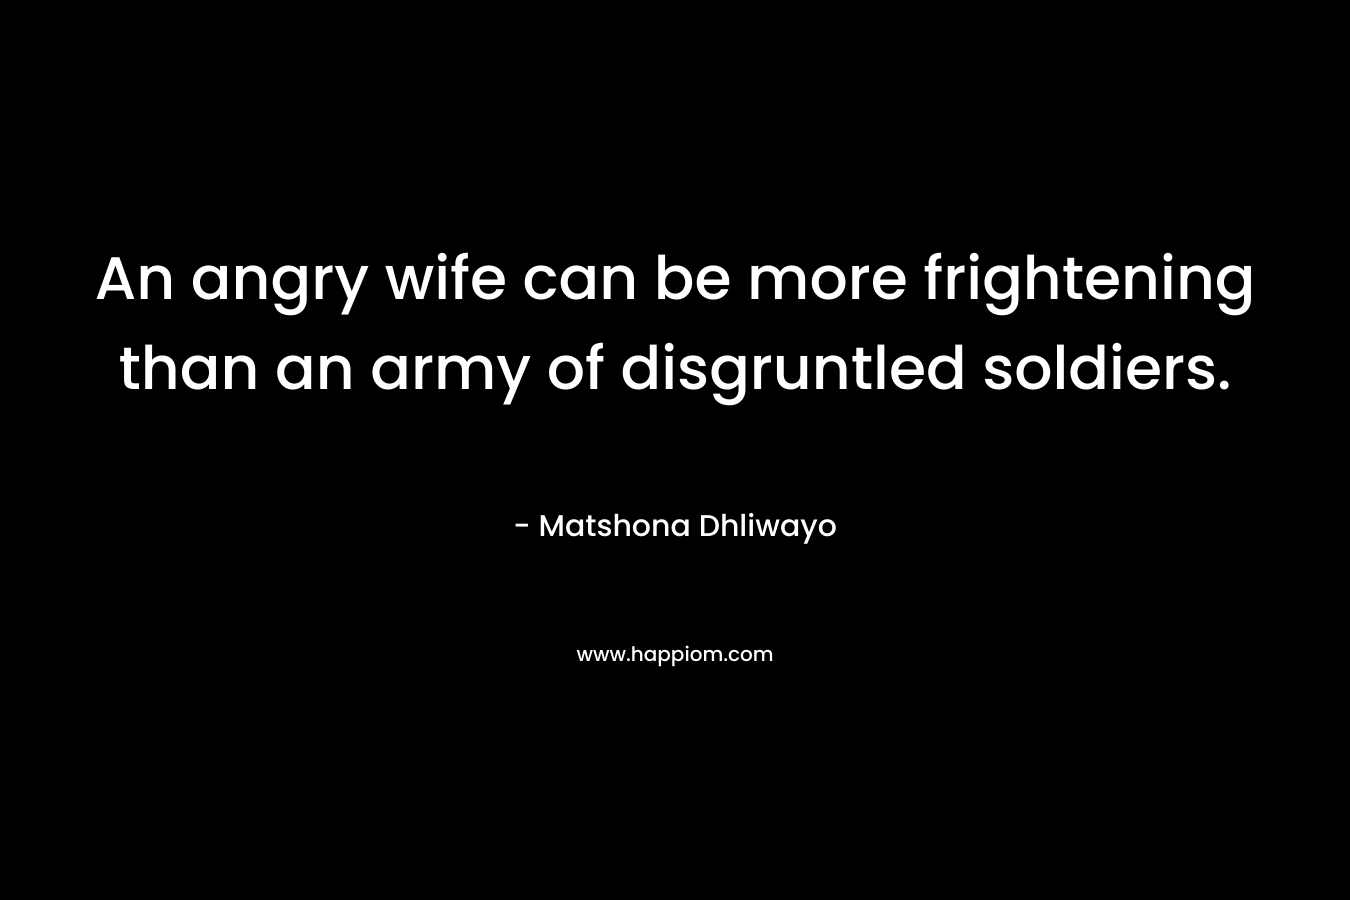 An angry wife can be more frightening than an army of disgruntled soldiers.